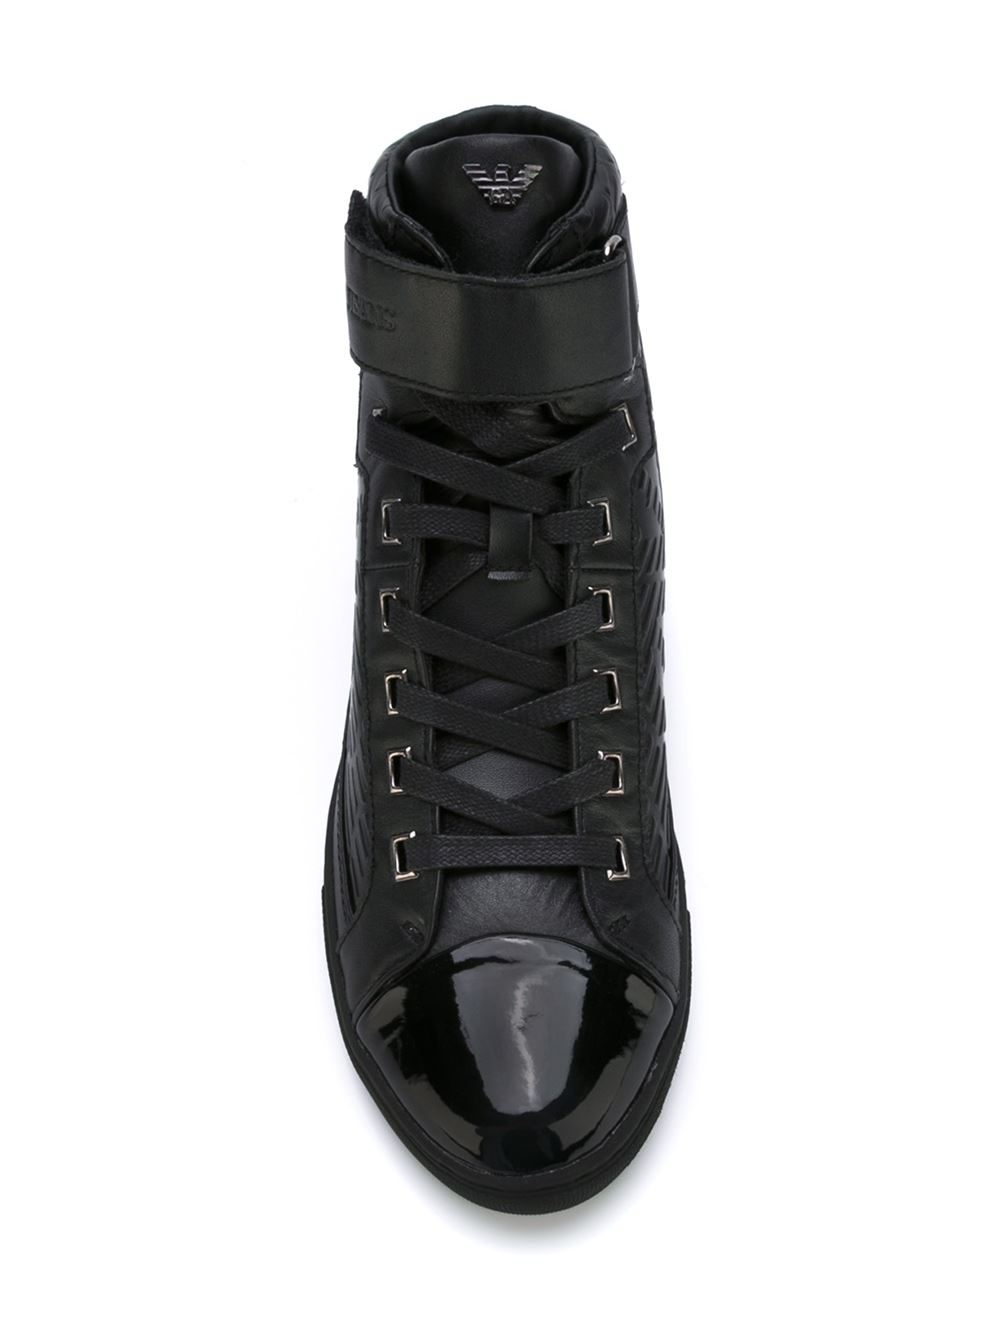 Armani Jeans Leather High-Top Sneakers in Black for Men | Lyst